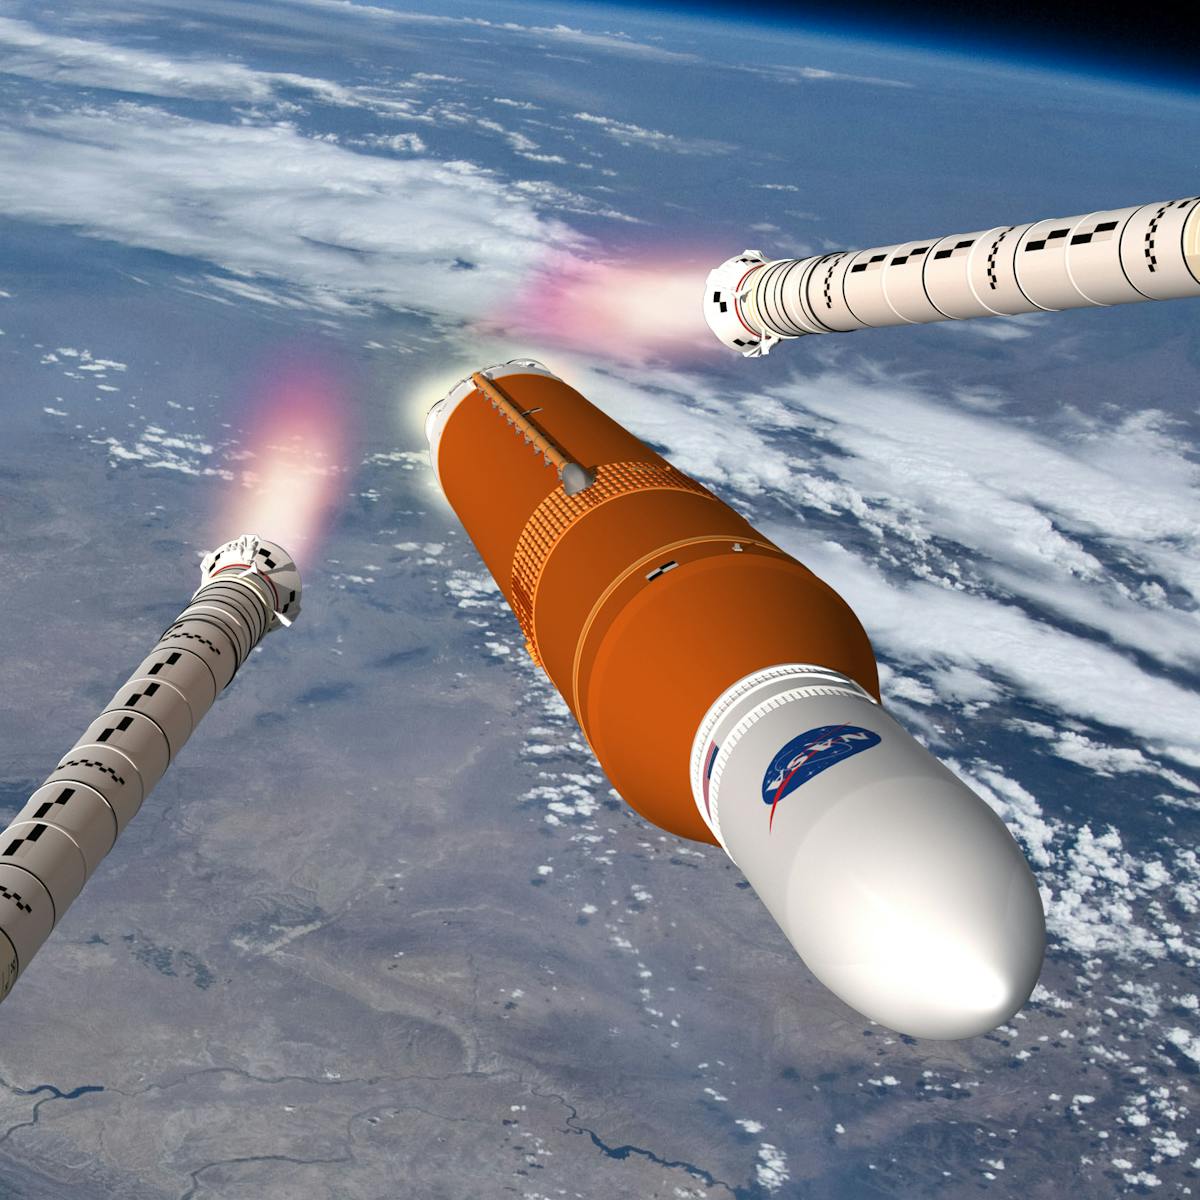 SpaceX vs Nasa: who will get us to the Moon first? Here's how their latest  rockets compare